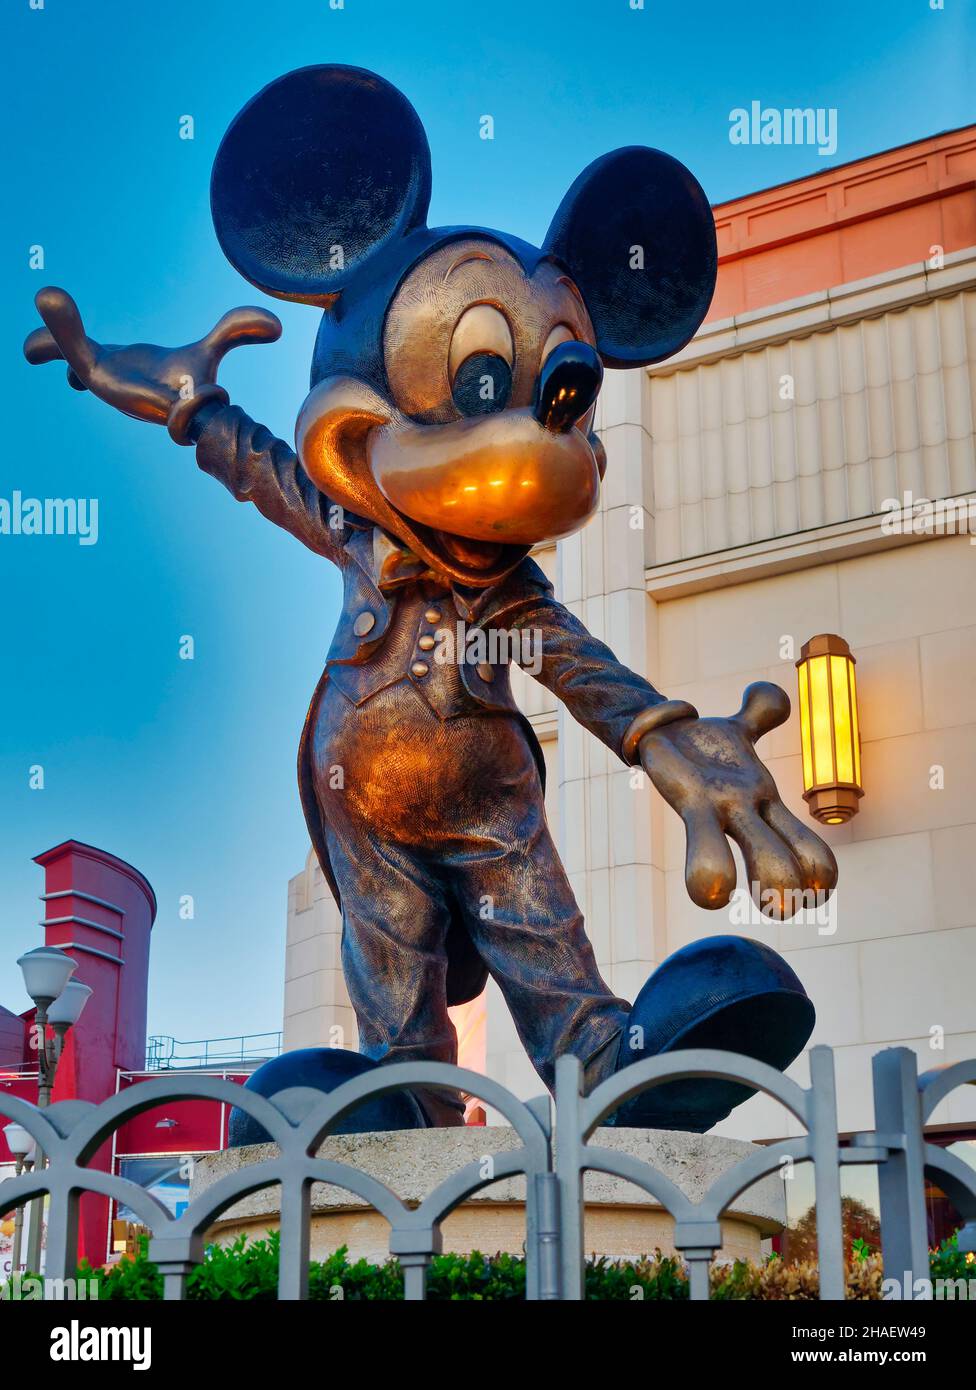 Paris, France - April 2019: Statue of mickey mouse against light blue sky background at disneyland funfair Stock Photo